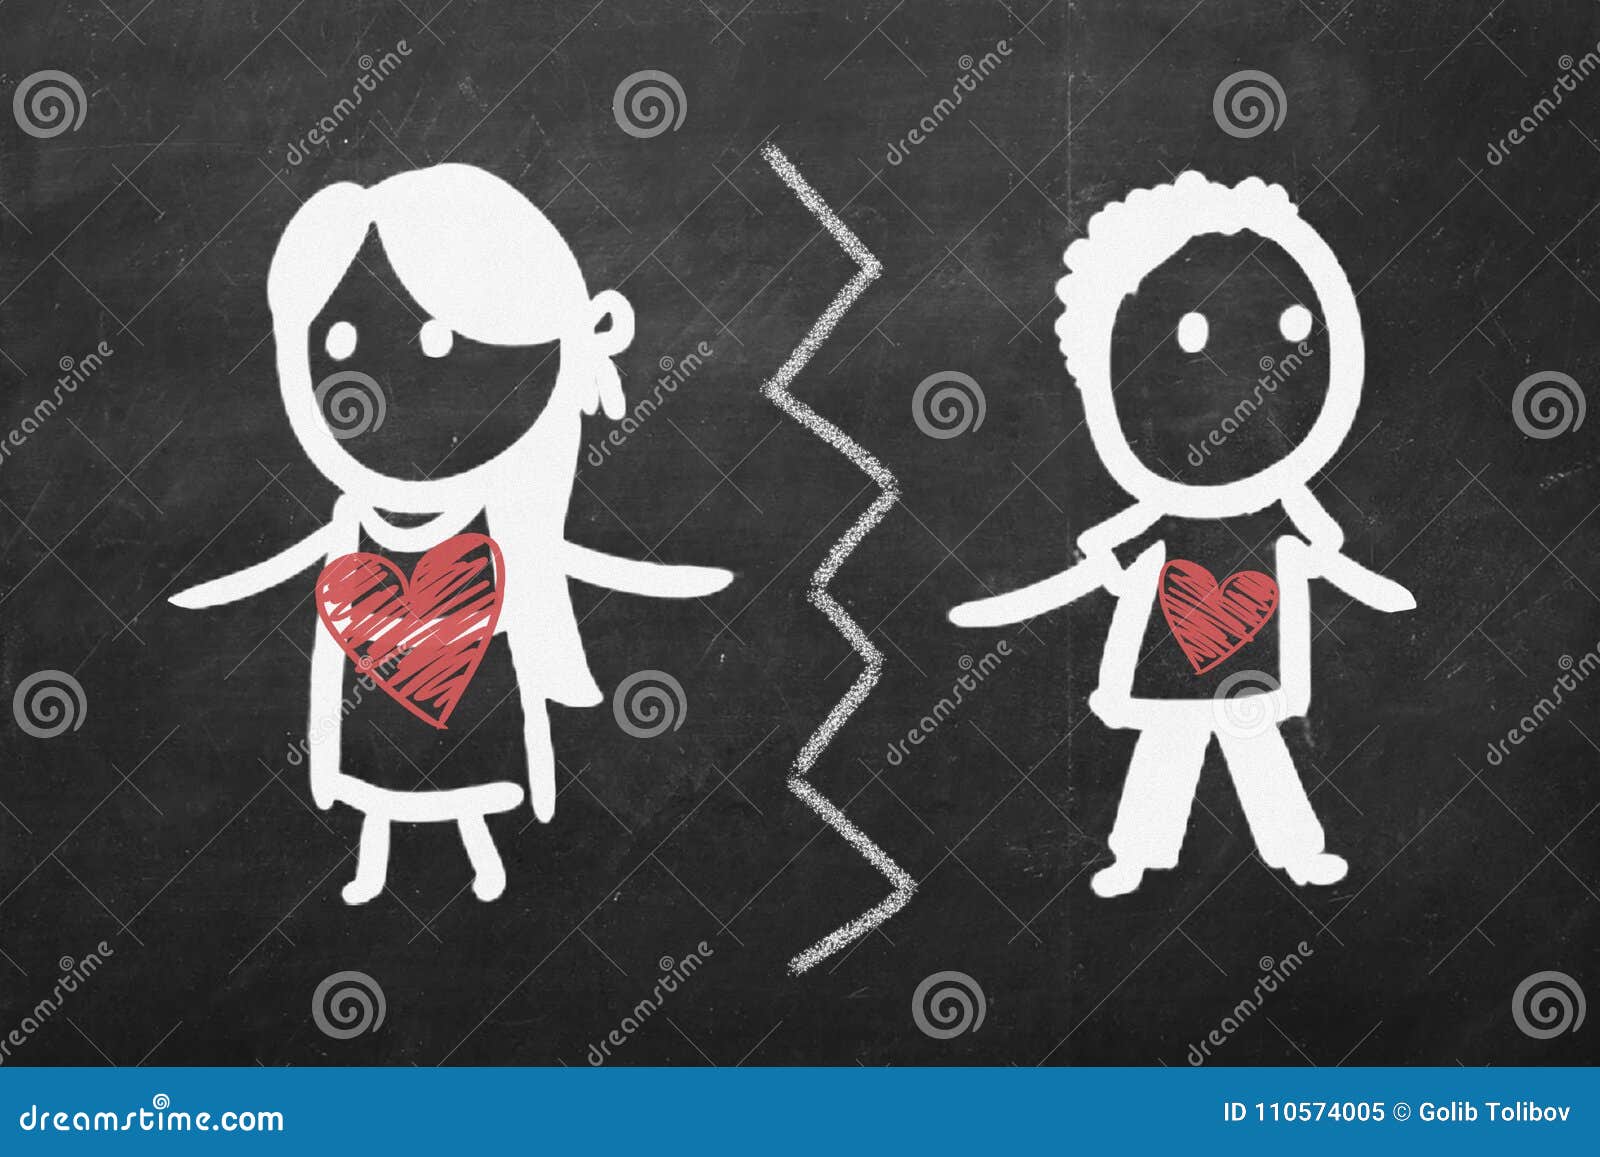 Break Up Concept. a Girl and a Boy Sketch Drawn on Chalkboard ...